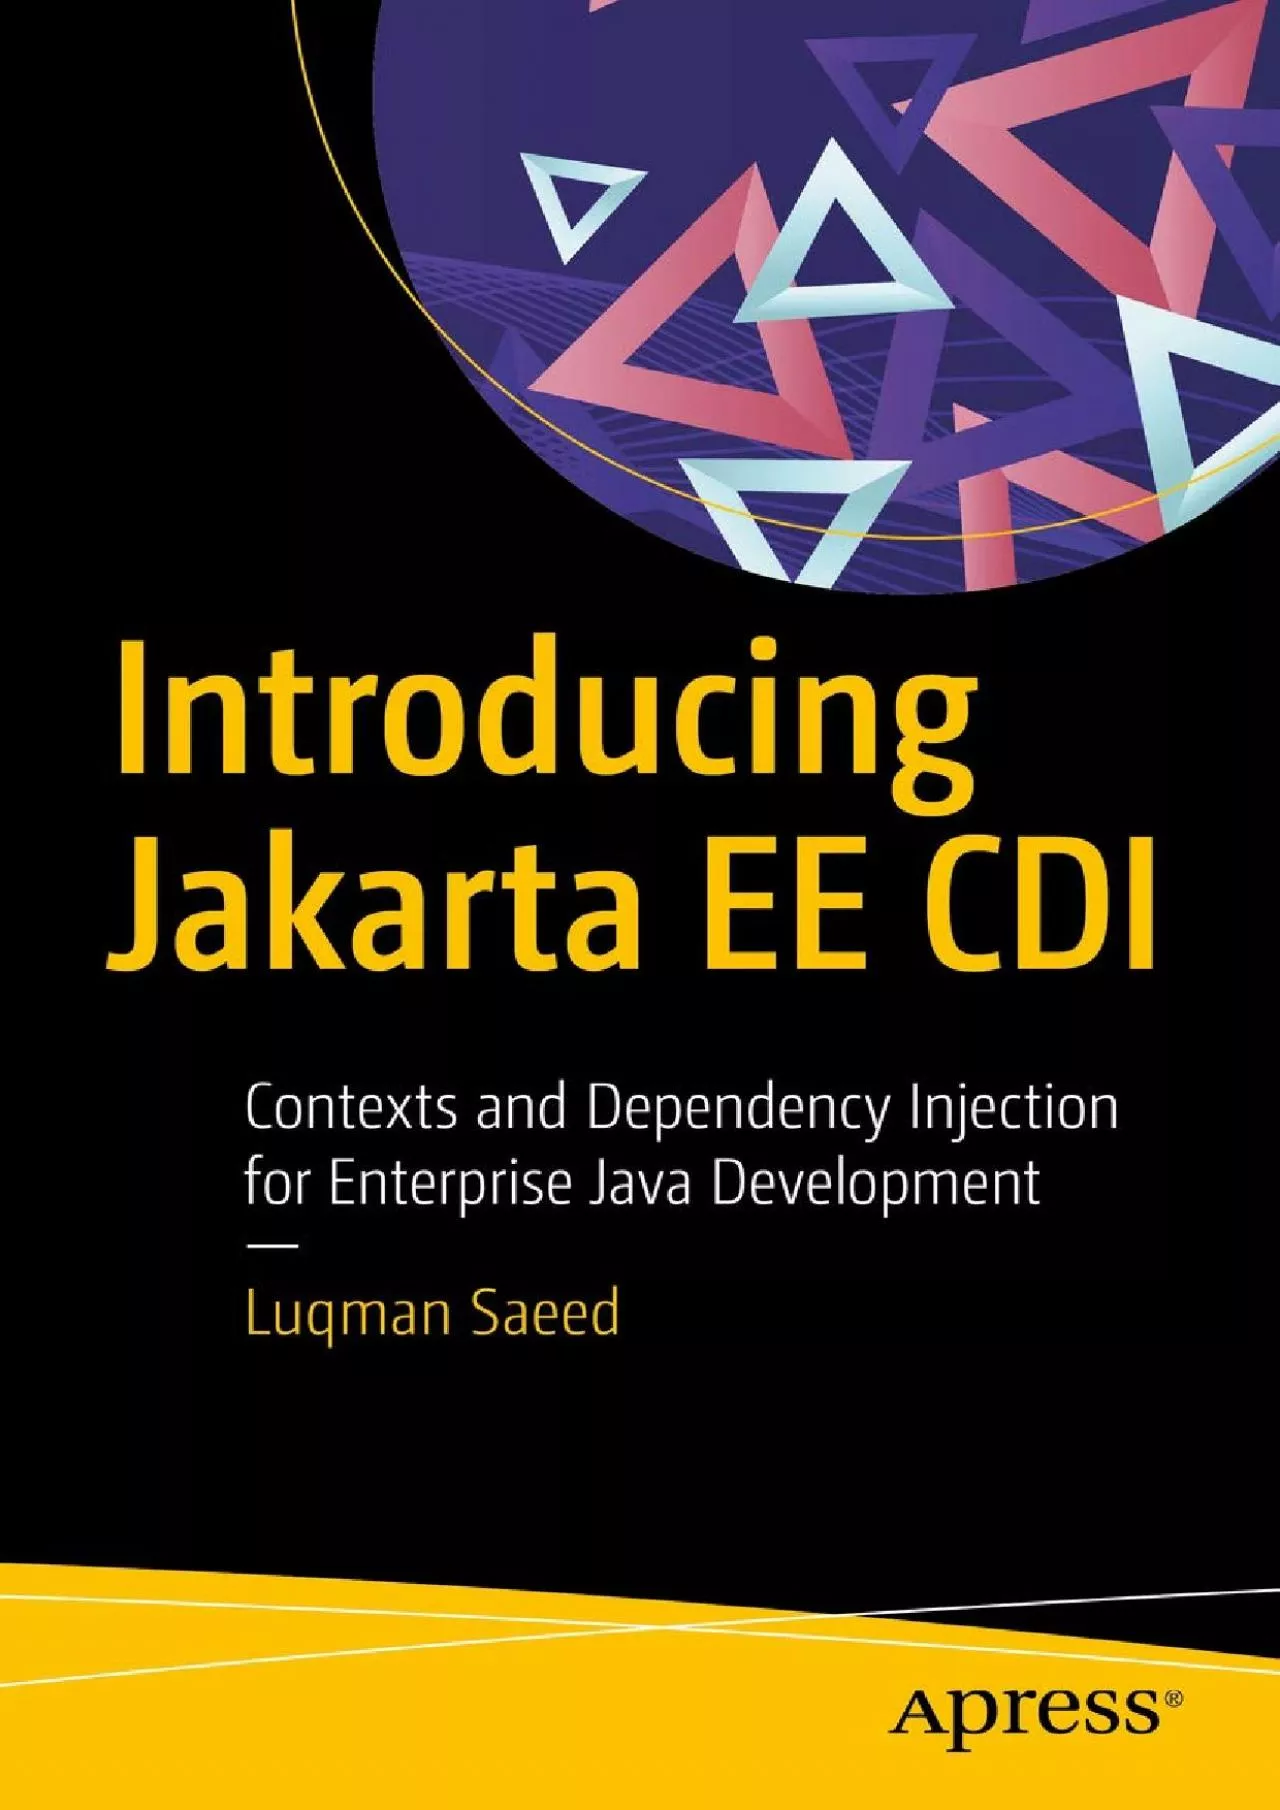 [READ]-Introducing Jakarta EE CDI: Contexts and Dependency Injection for Enterprise Java